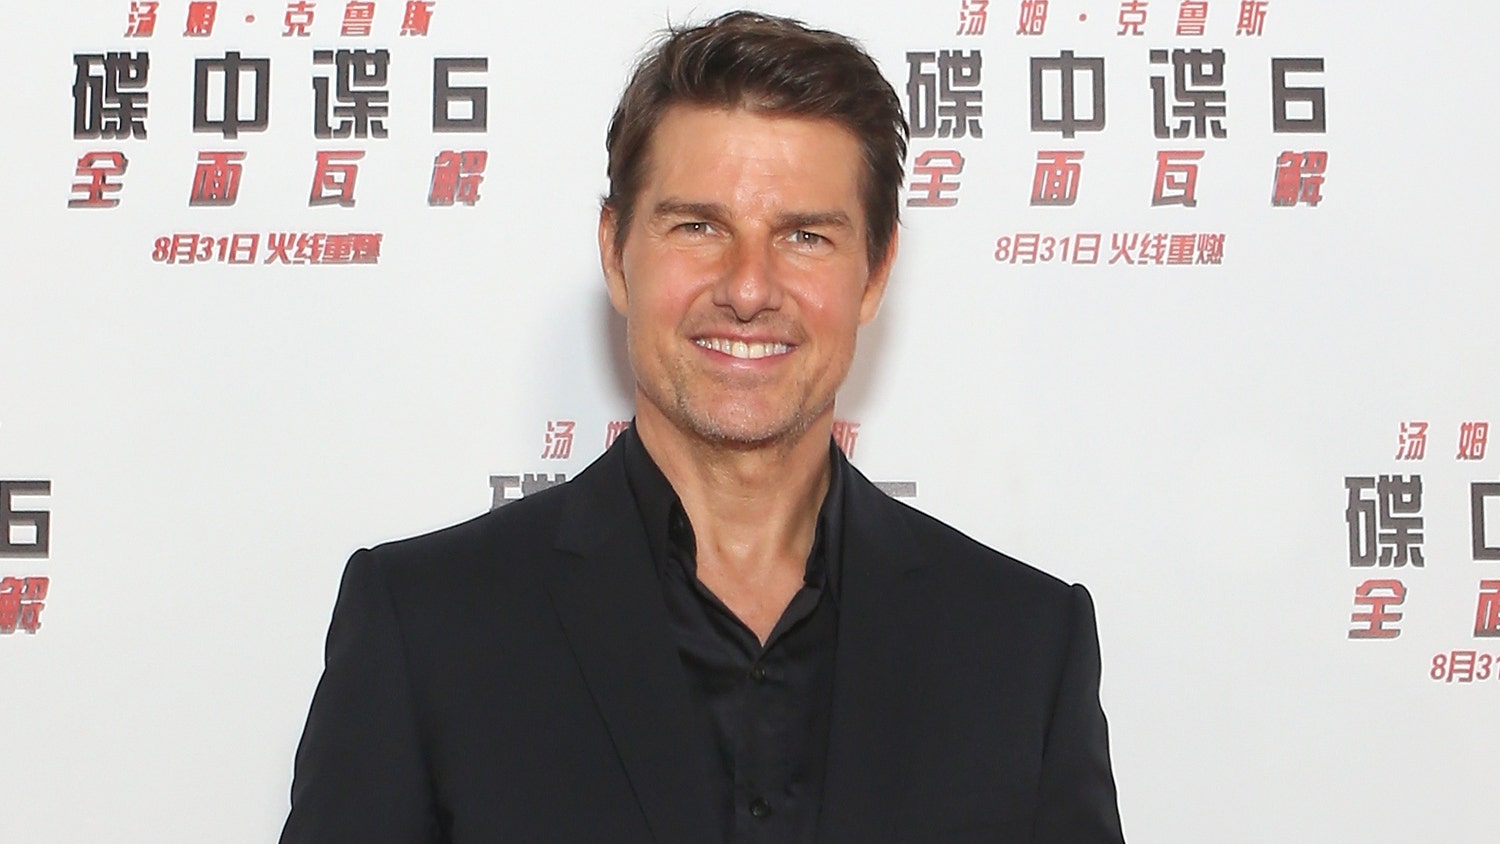 Tom Cruise returns his Golden Globes amid HFPA controversy